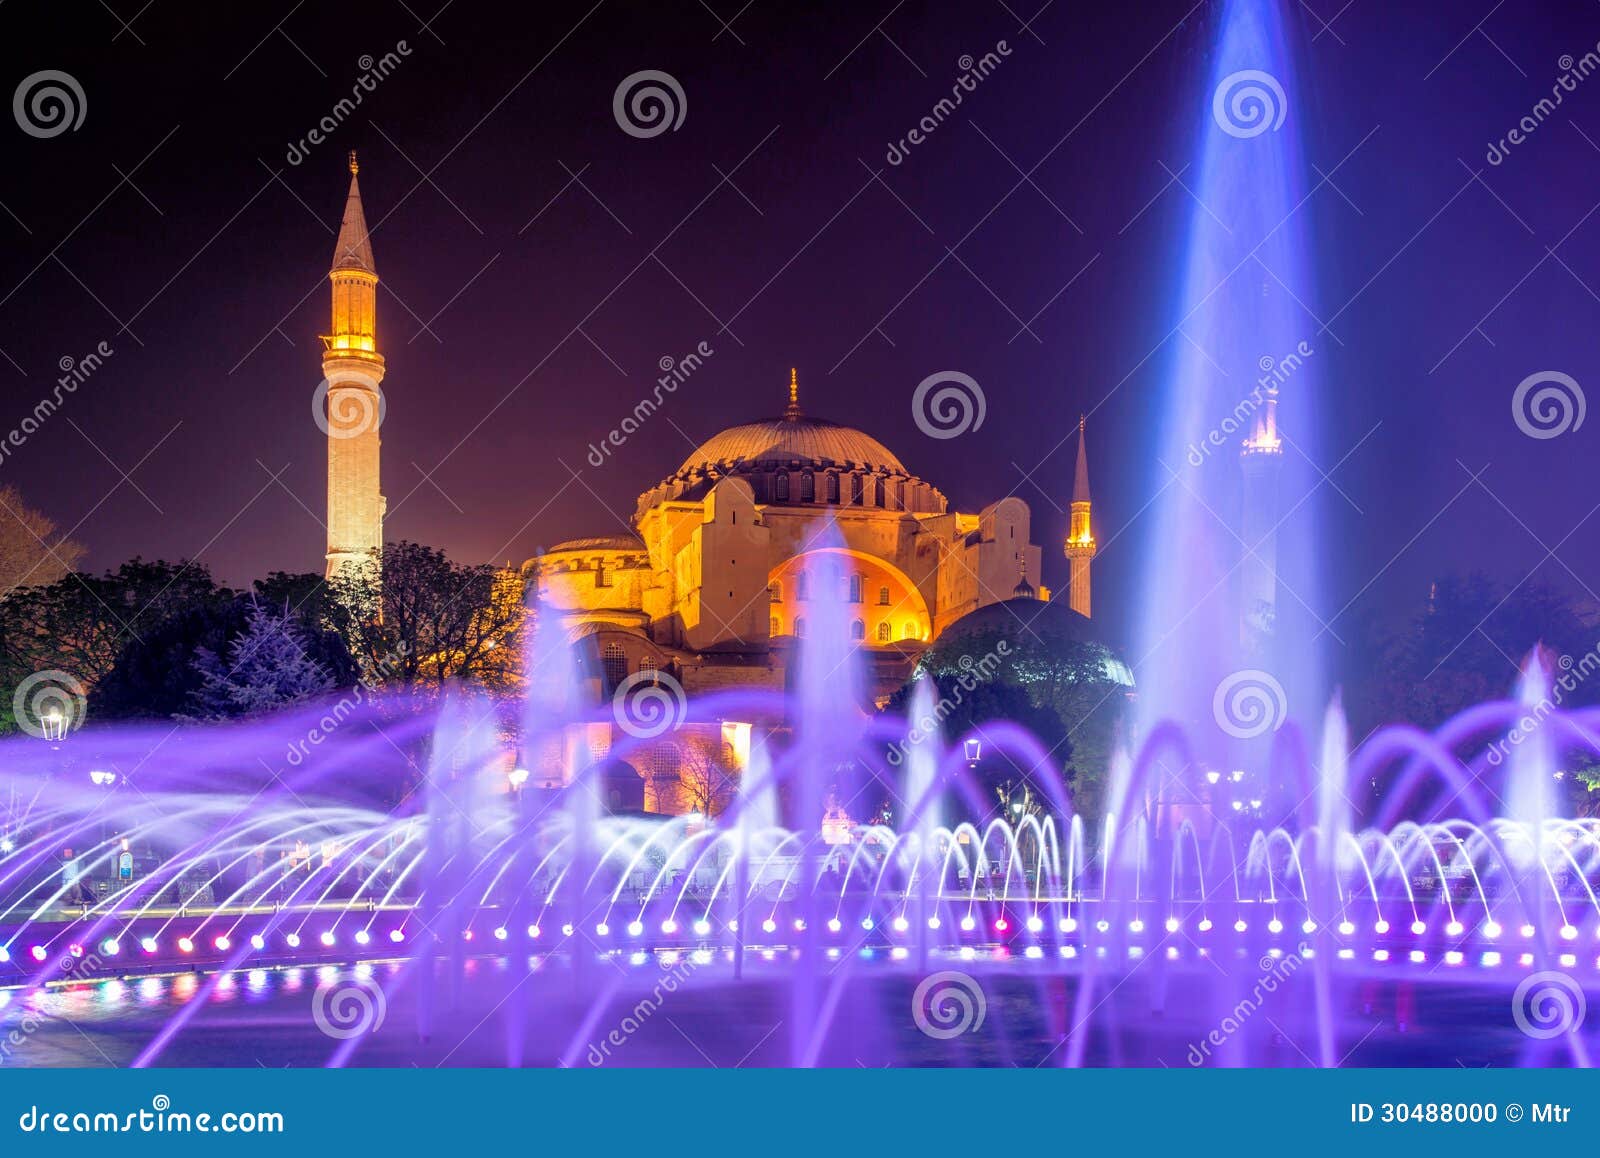 sultan ahmed mosque